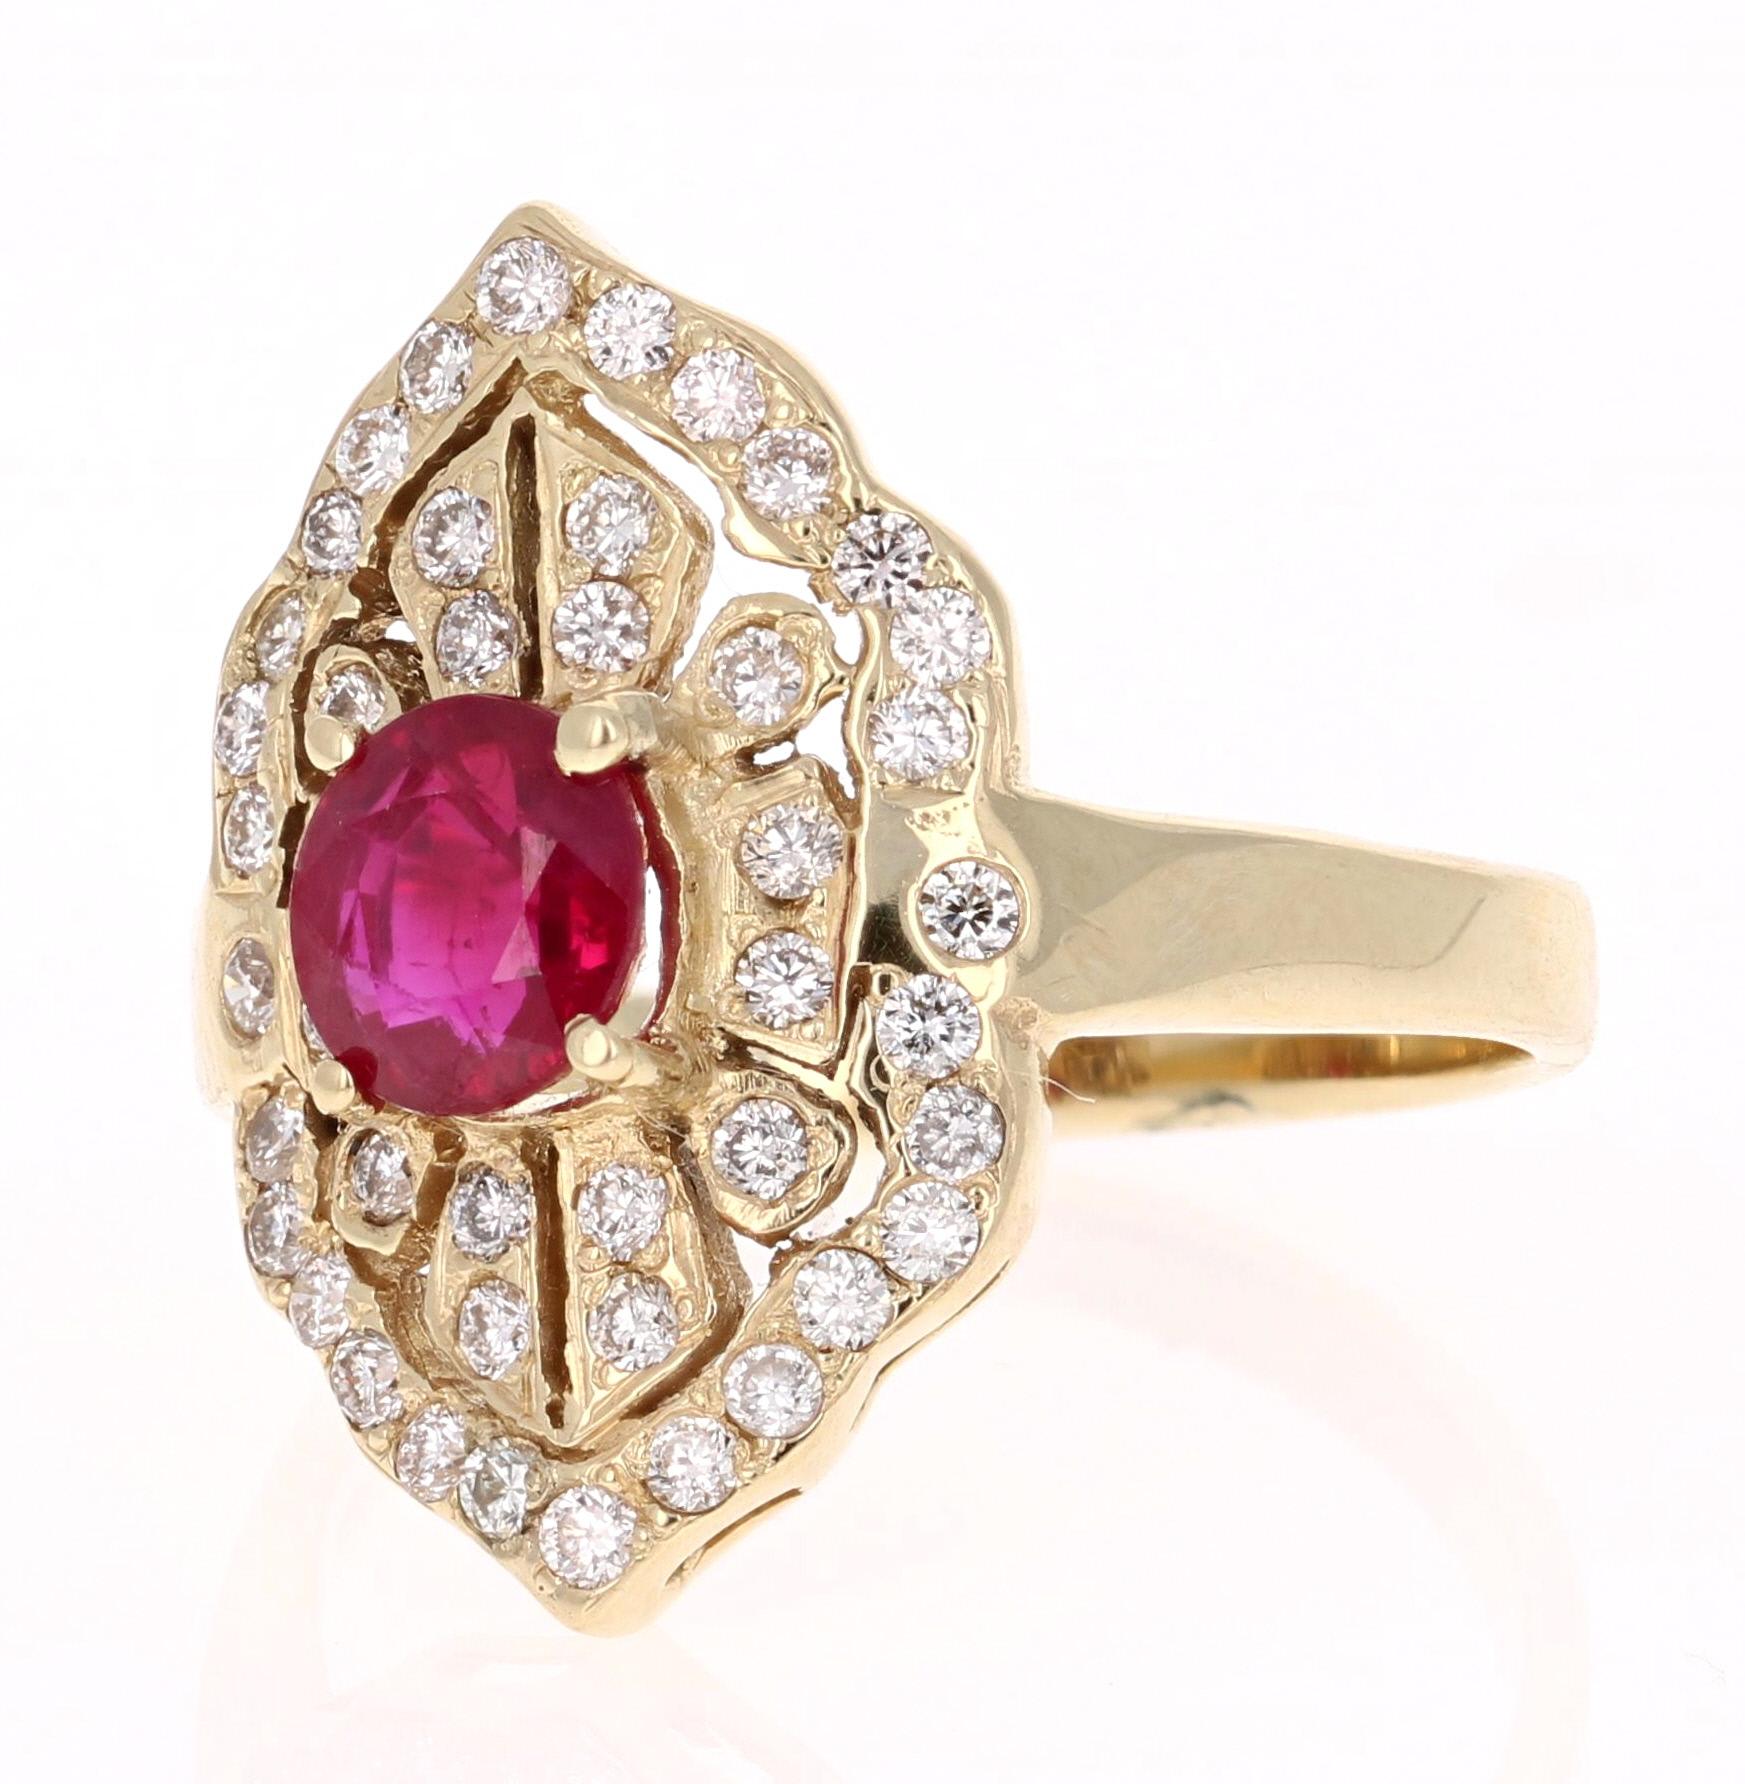 This Art-Deco Inspired Ring is truly a unique vintage beauty! The Oval Cut Ruby is 1.10 carats and is surrounded by 44 Round Cut Diamonds that weigh 0.54 carat (Clarity: VS2, Color: H).  The total carat weight of the ring is 1.64 carats.  The ring